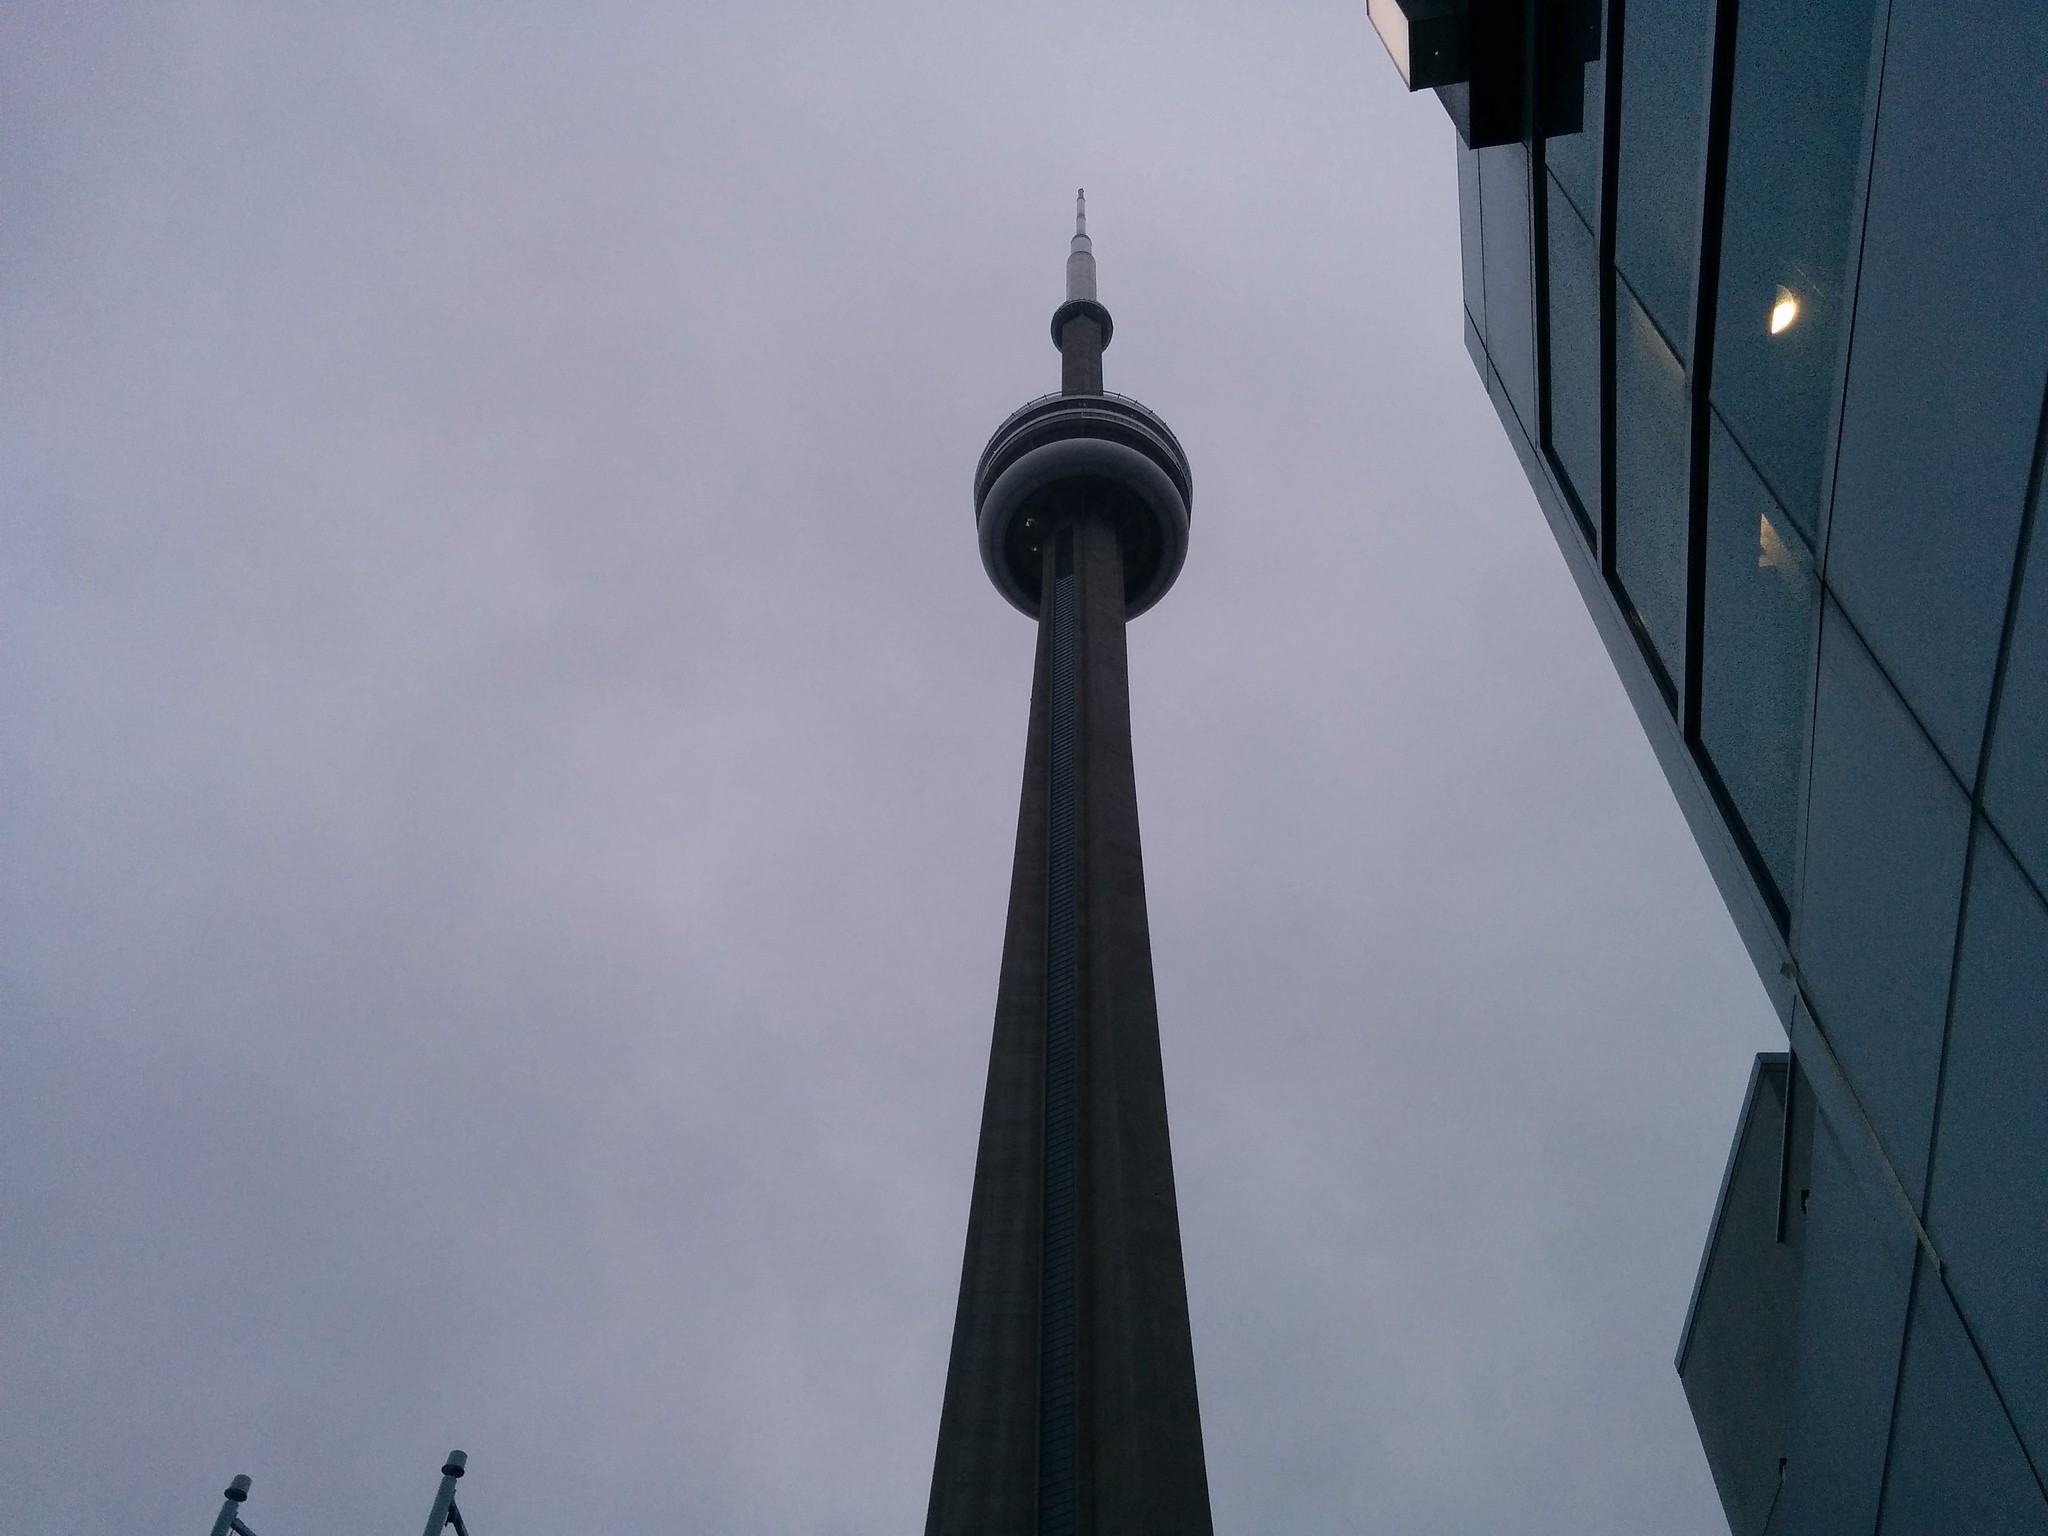 Looking up at the CN Tower #toronto #southcore #cntower #skyline #evening